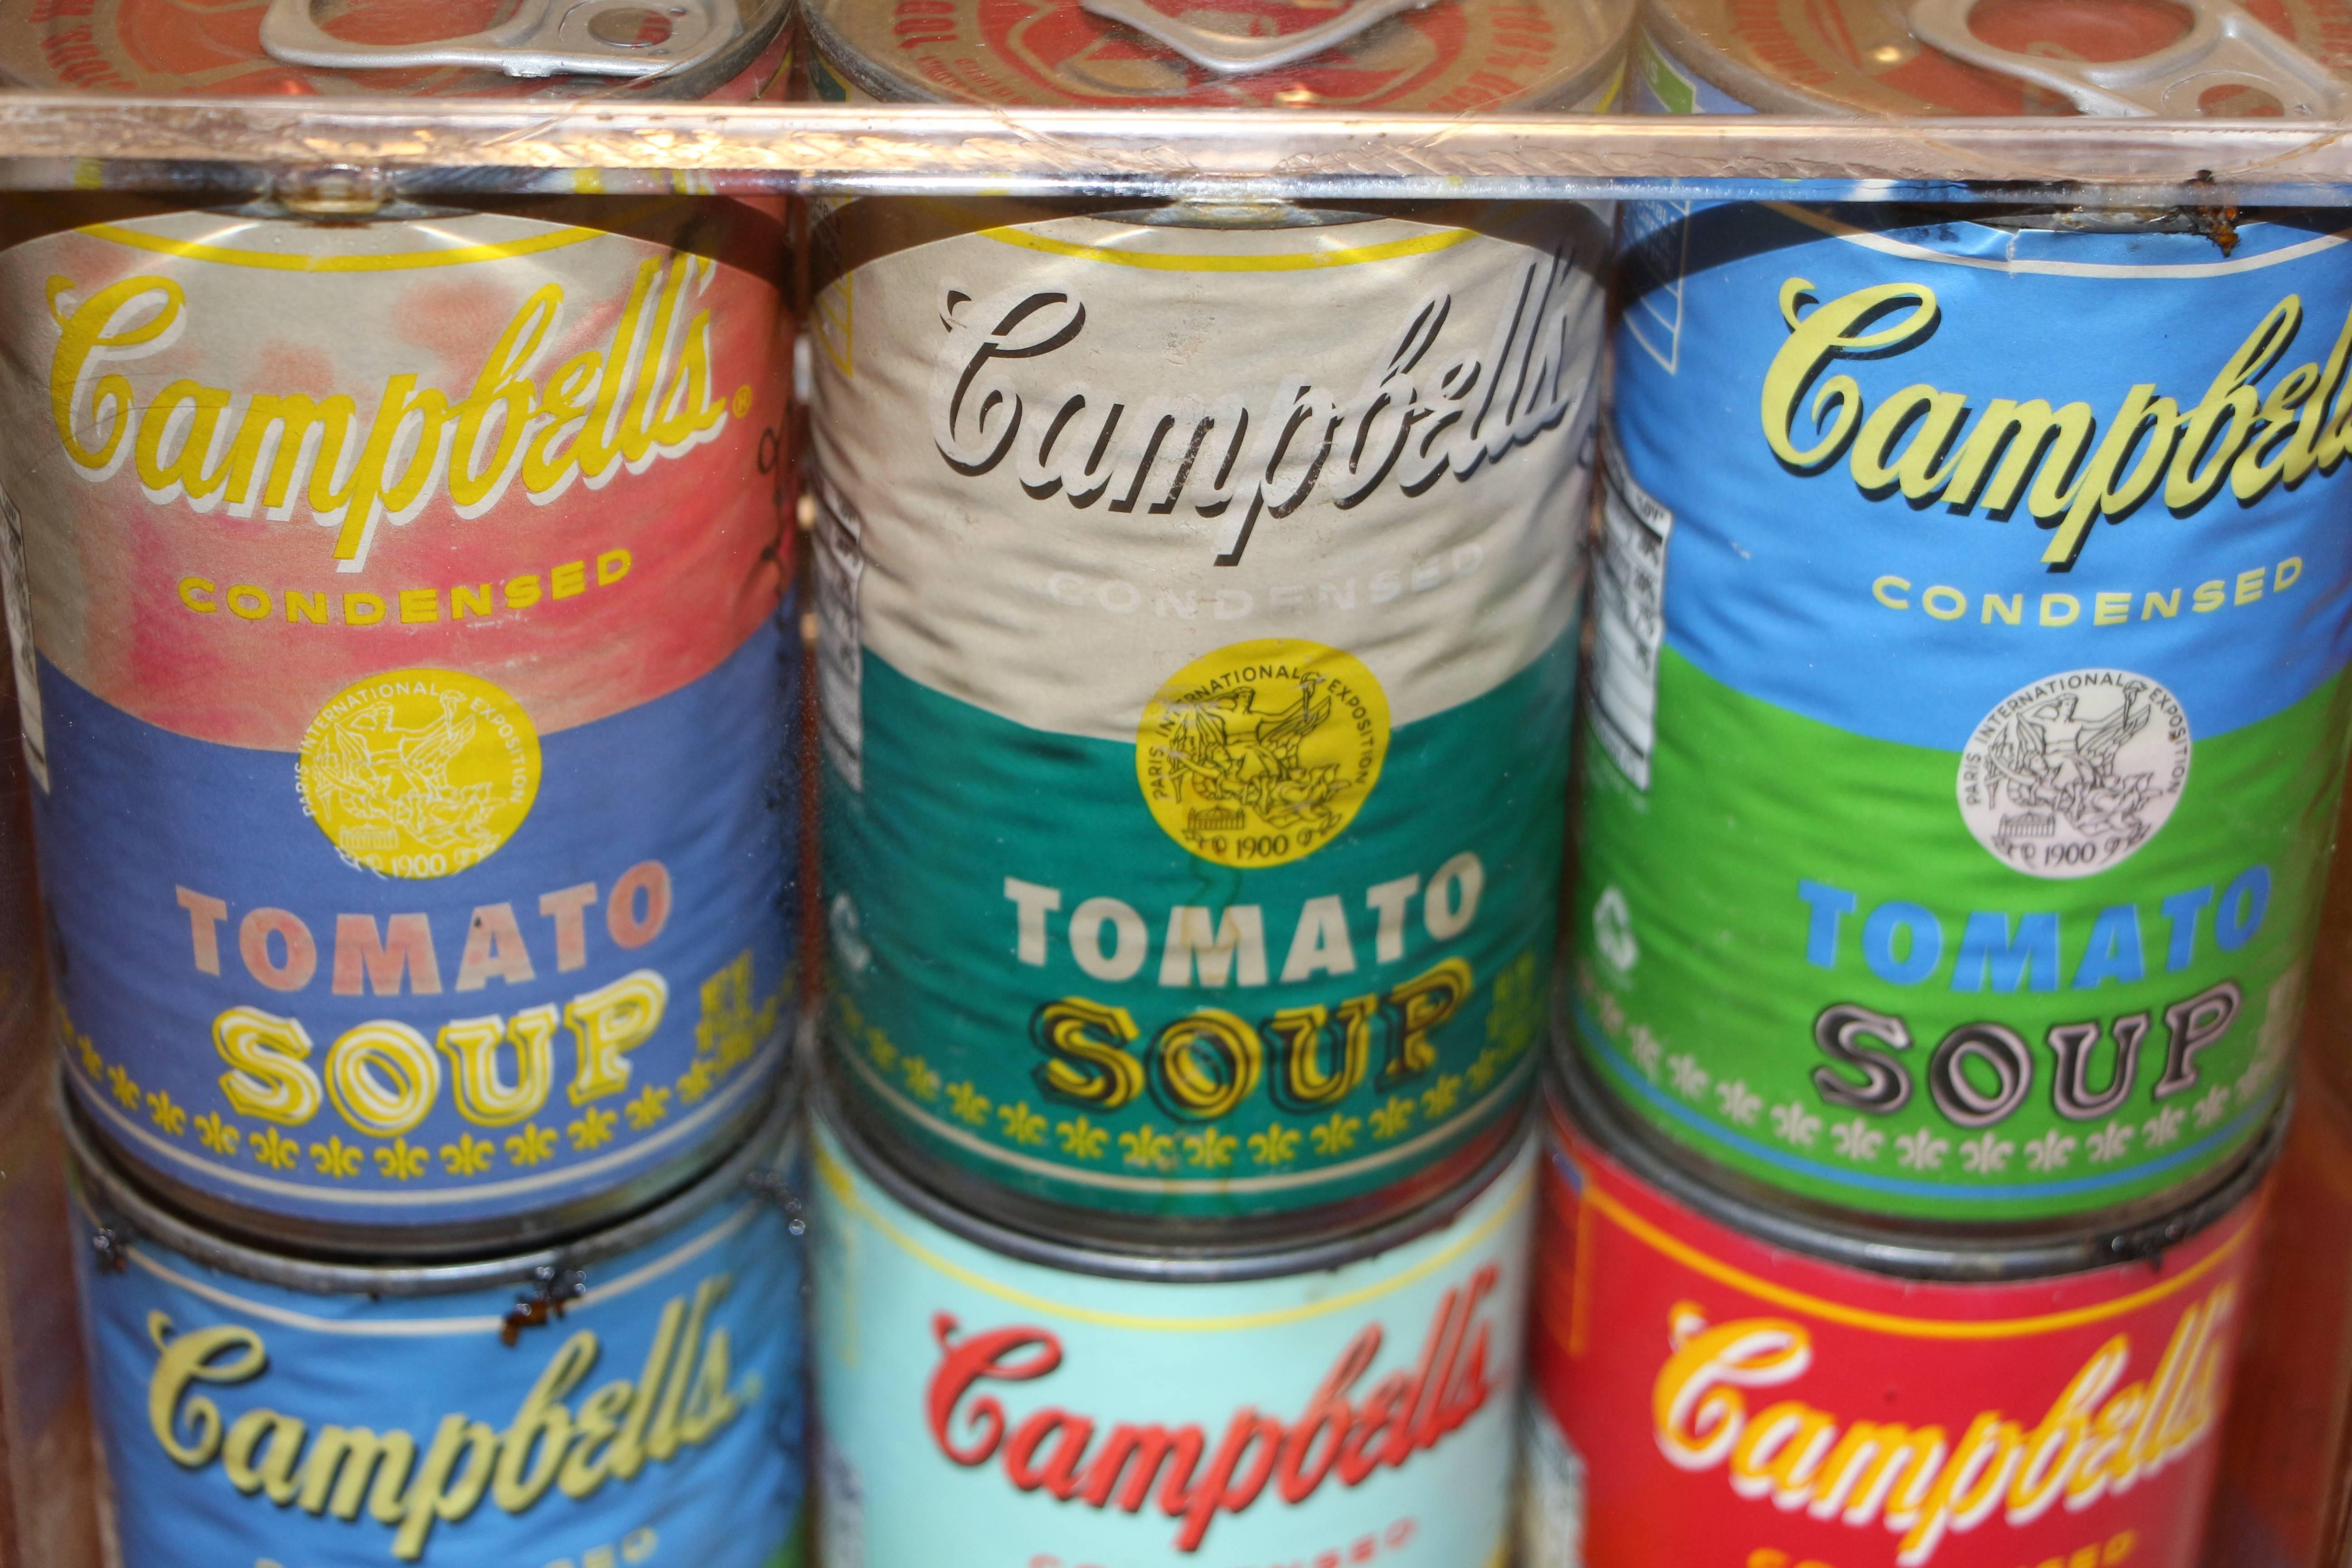 A nice and interesting collection of tomato soup cans by Campbell in honour of Andy Warhol's 50th anniversary of his original soup can. They have been mounted in a Lucite hanging display case. They were made in 2012 for target i believe.